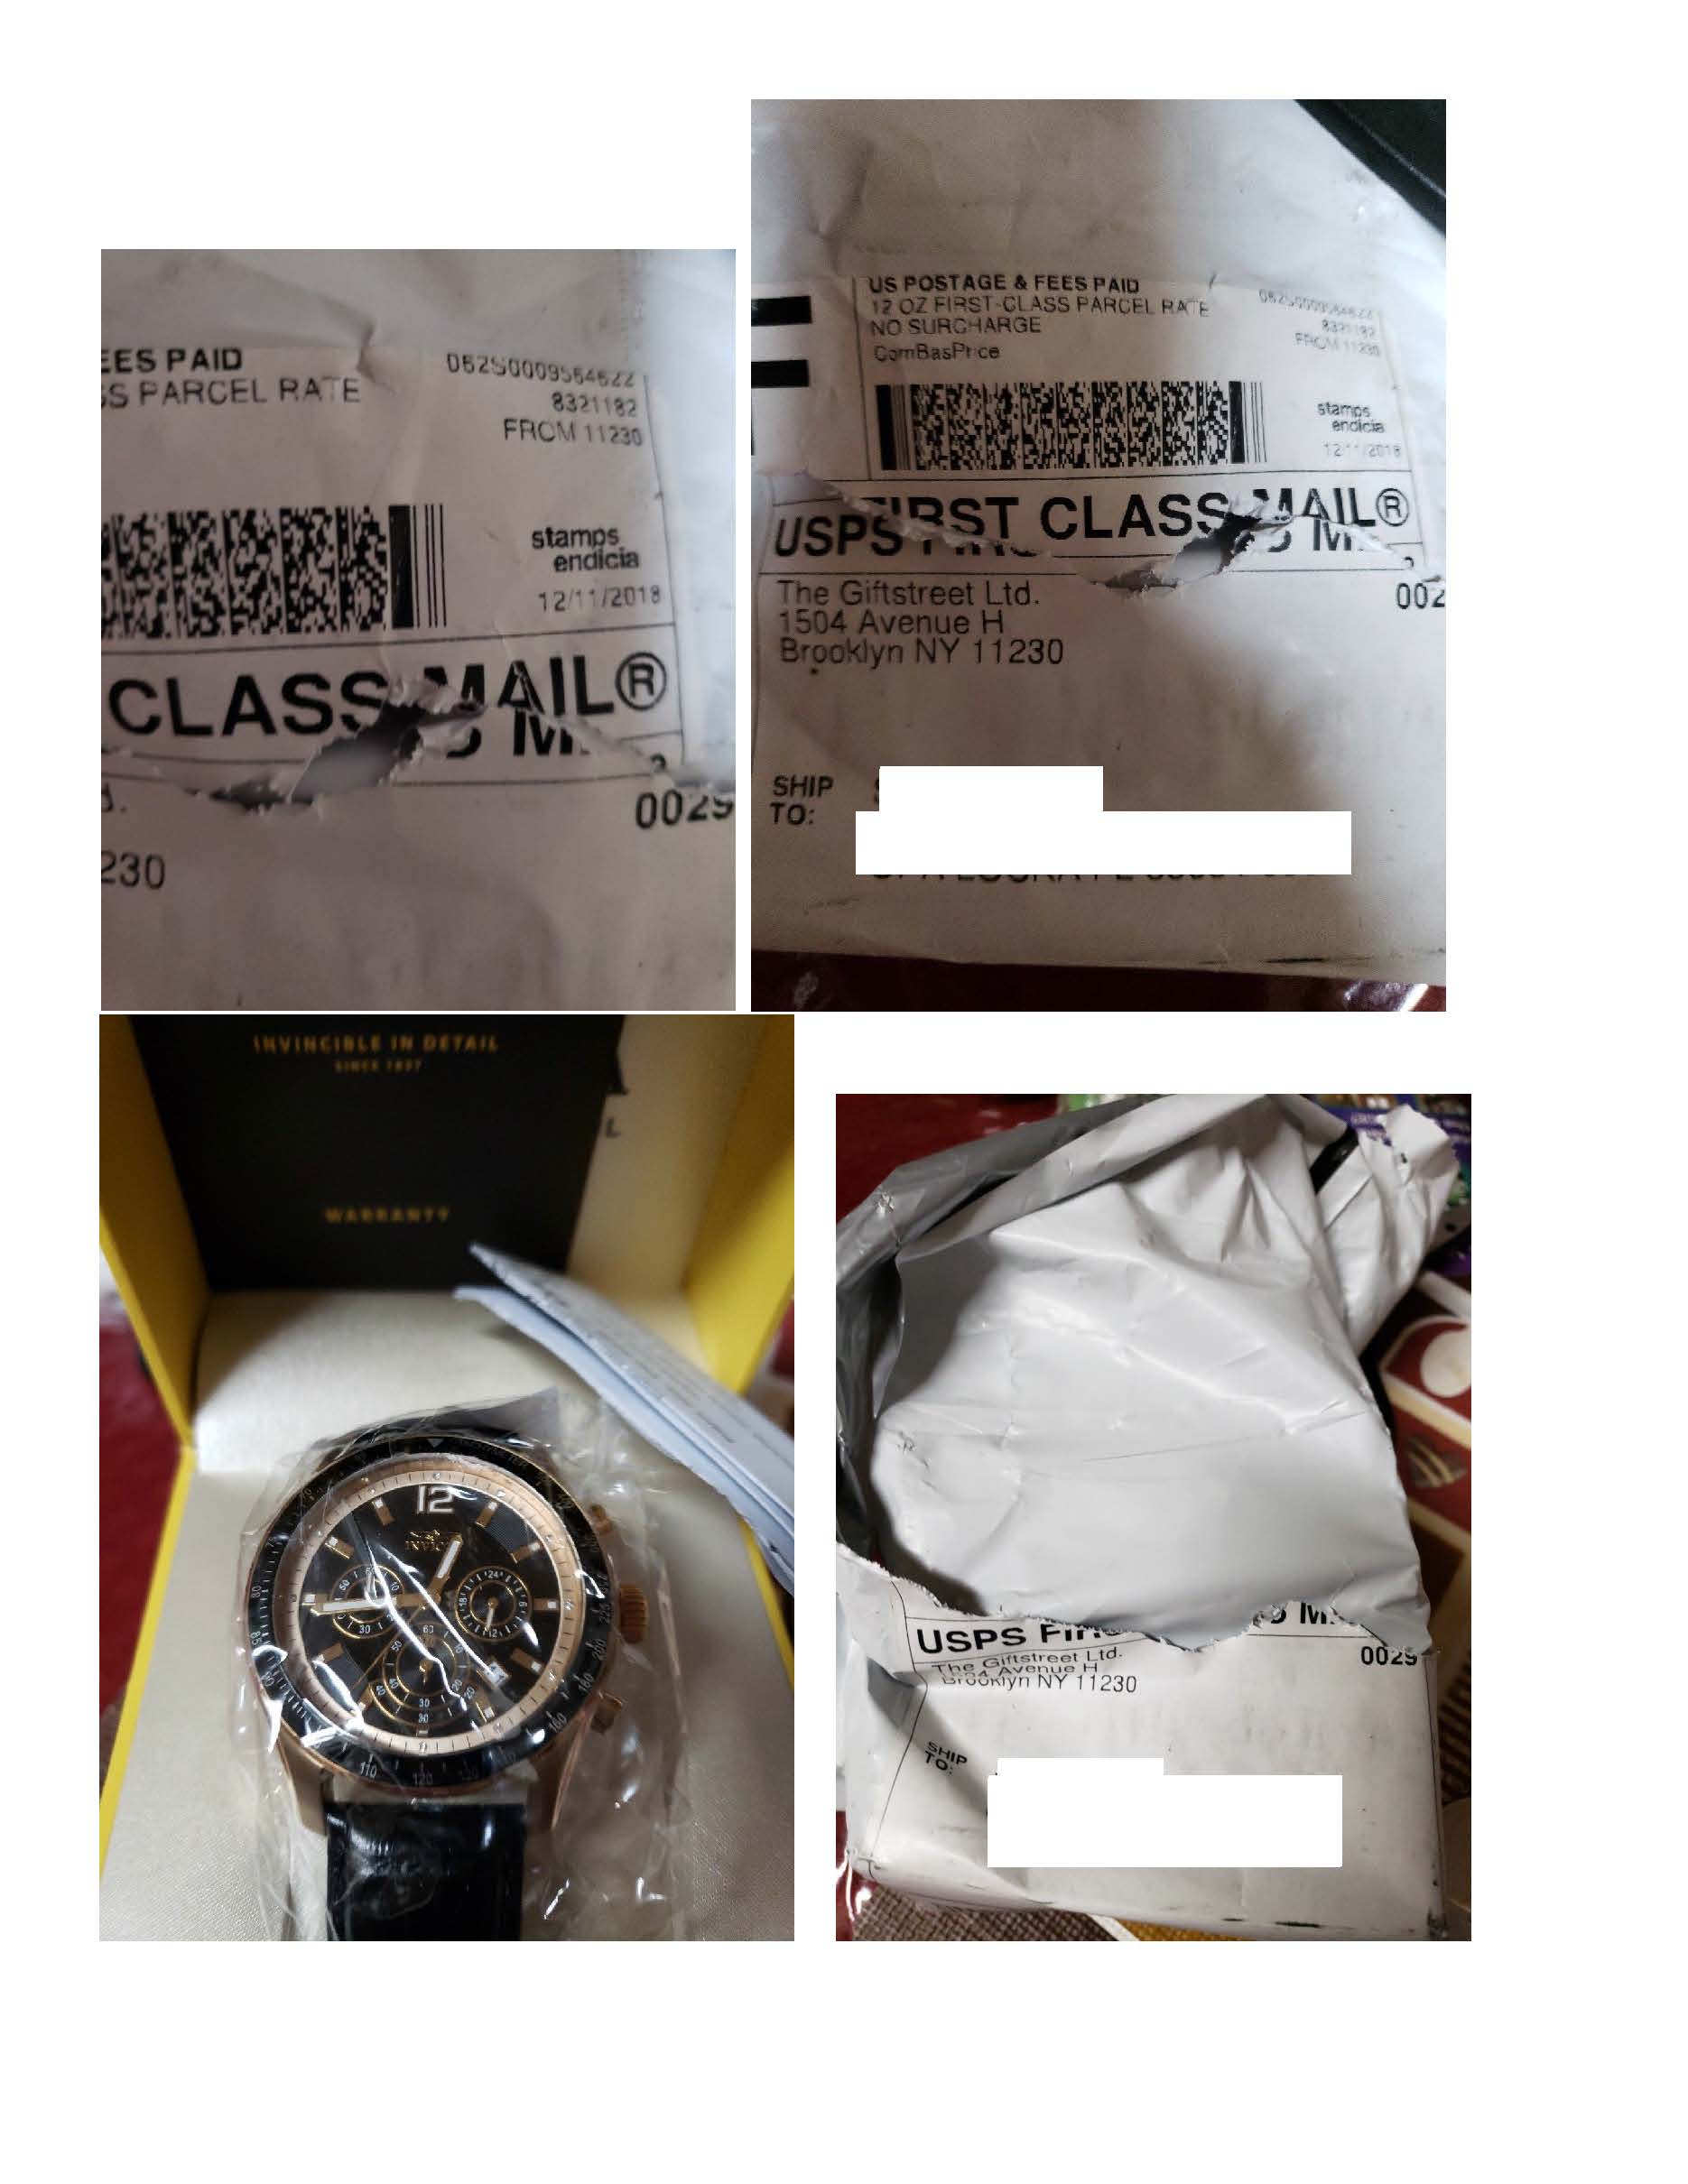 Proof of purchase of watch from the first theft